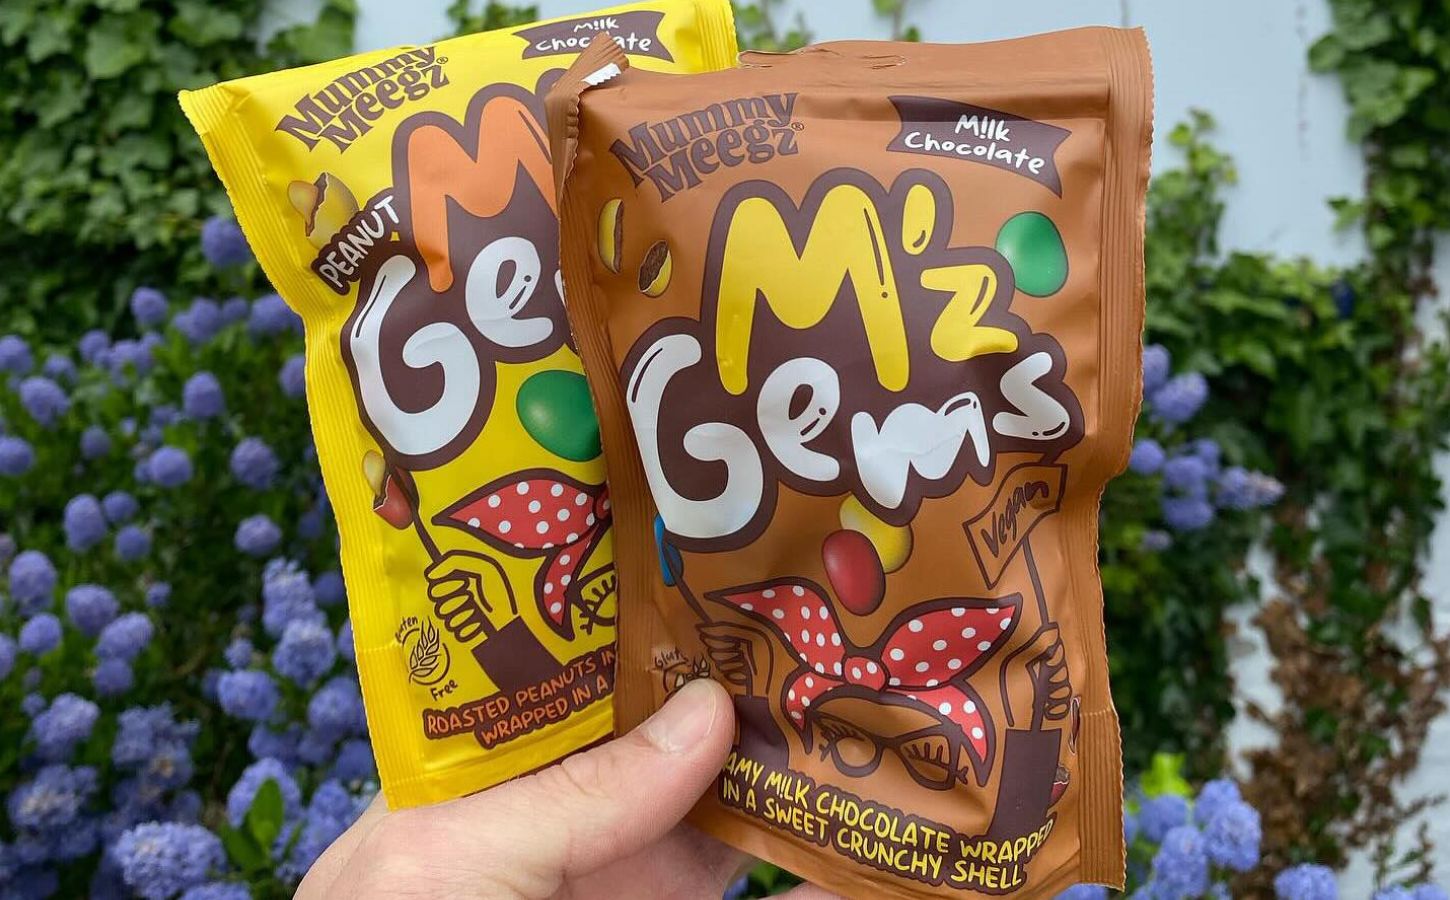 Two packets of "M'z Gems" (vegan dupes of M&Ms) being held up in front of a flower bush